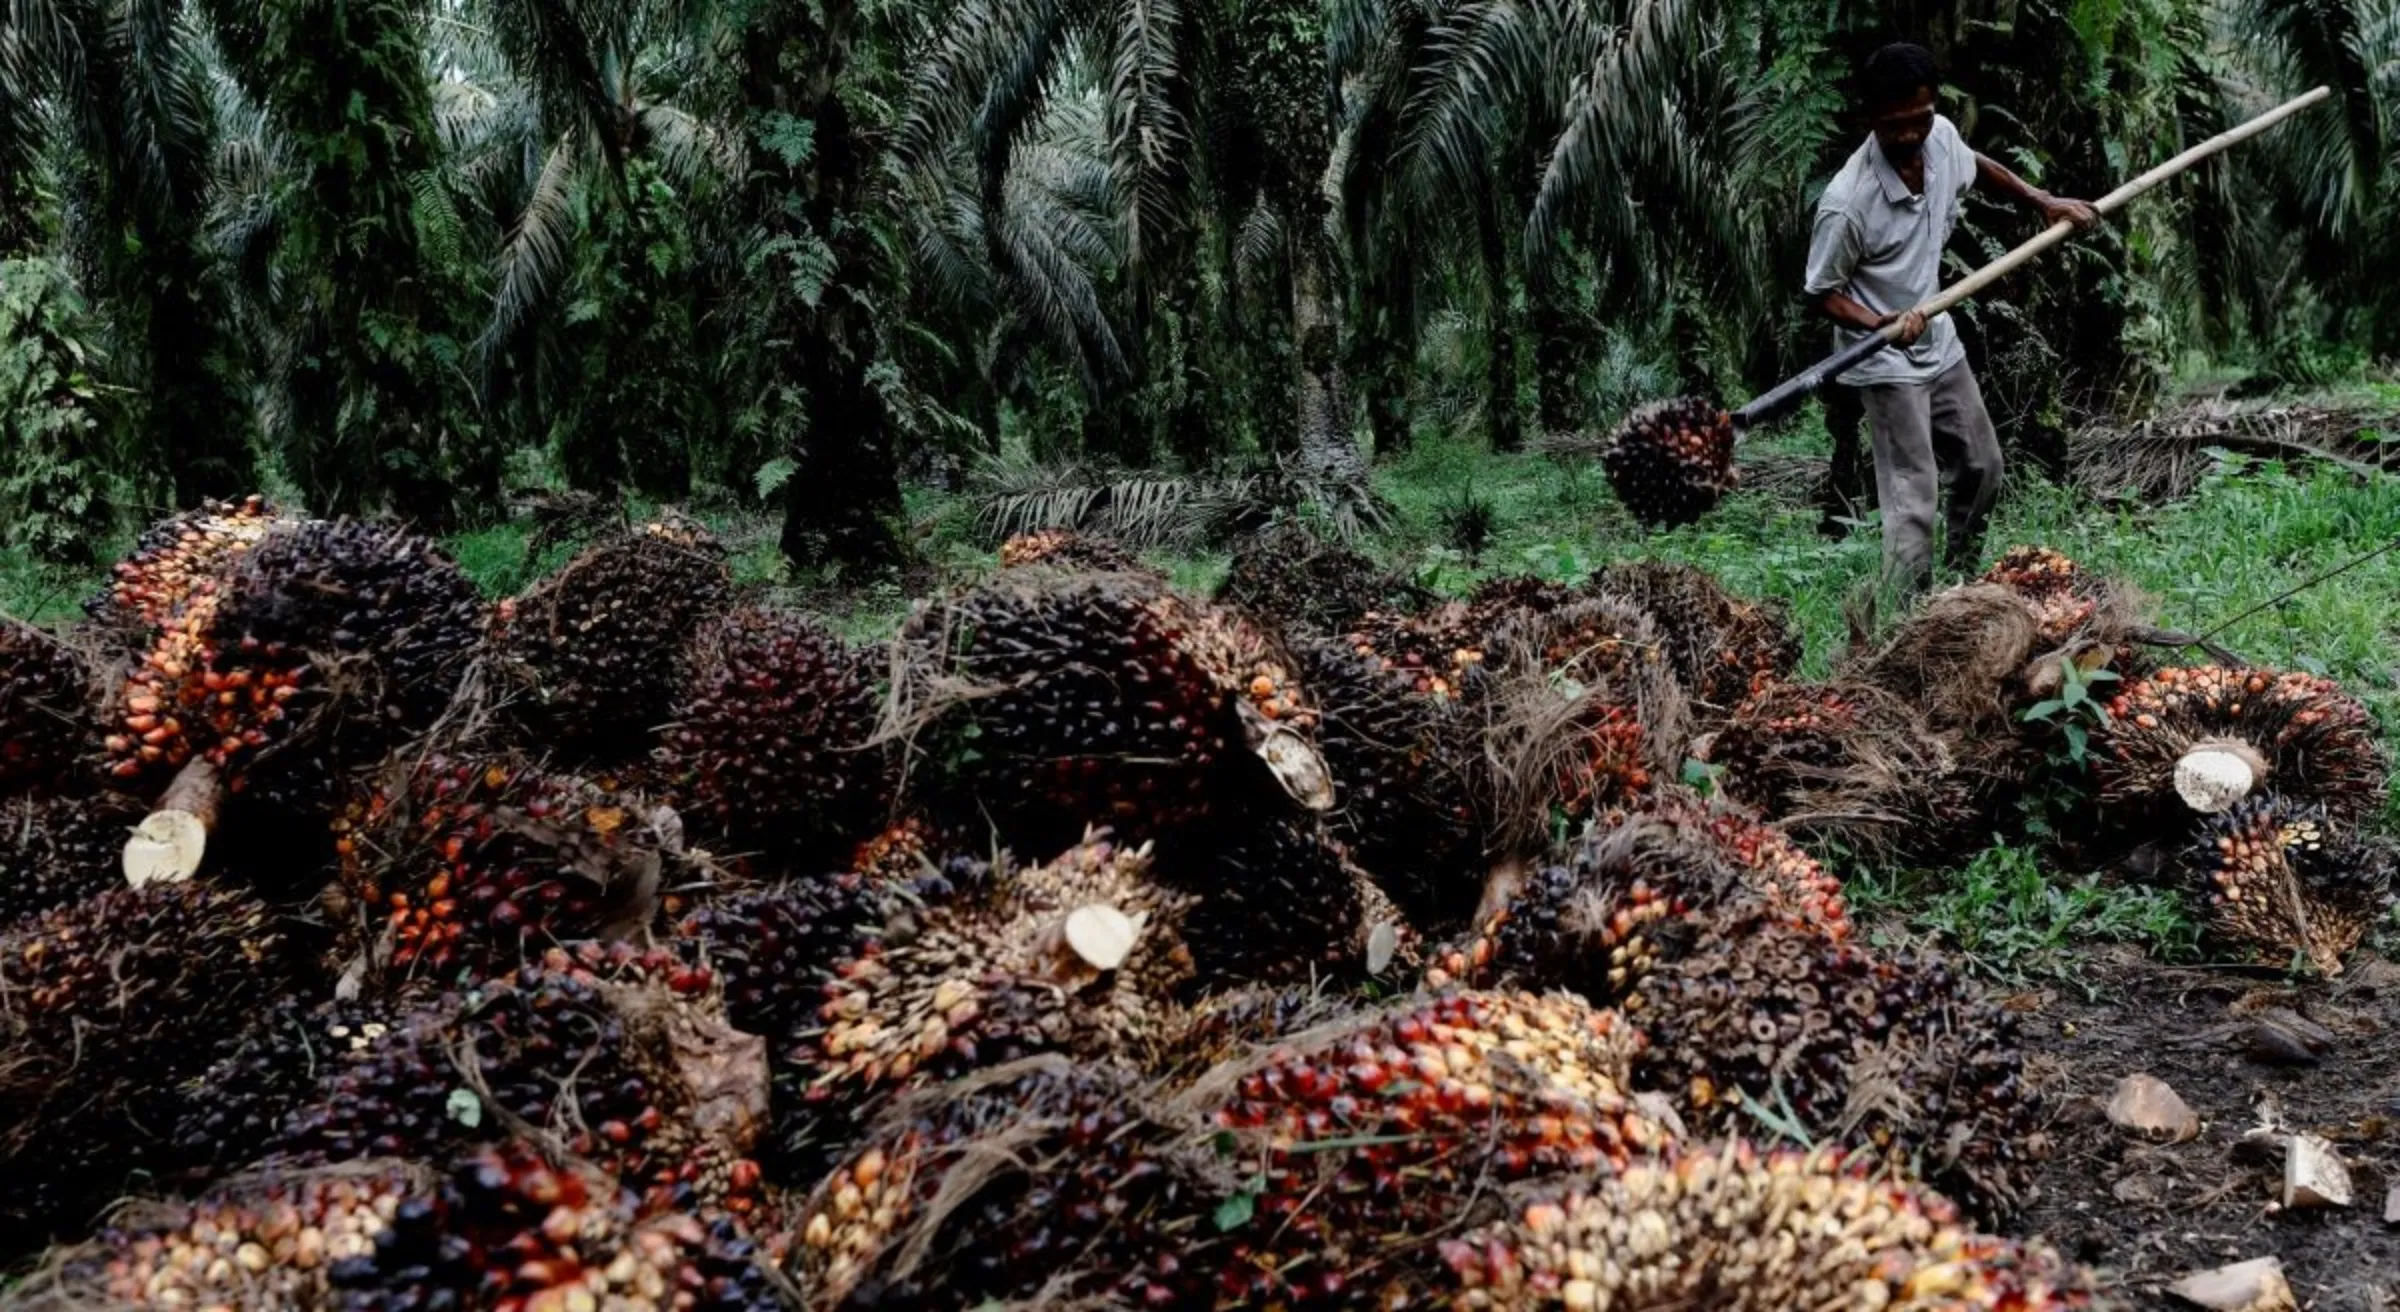 A worker collects fresh fruit bunches during harvest at a palm oil plantation in Kampar regency, in Riau province, Indonesia, April 26, 2022